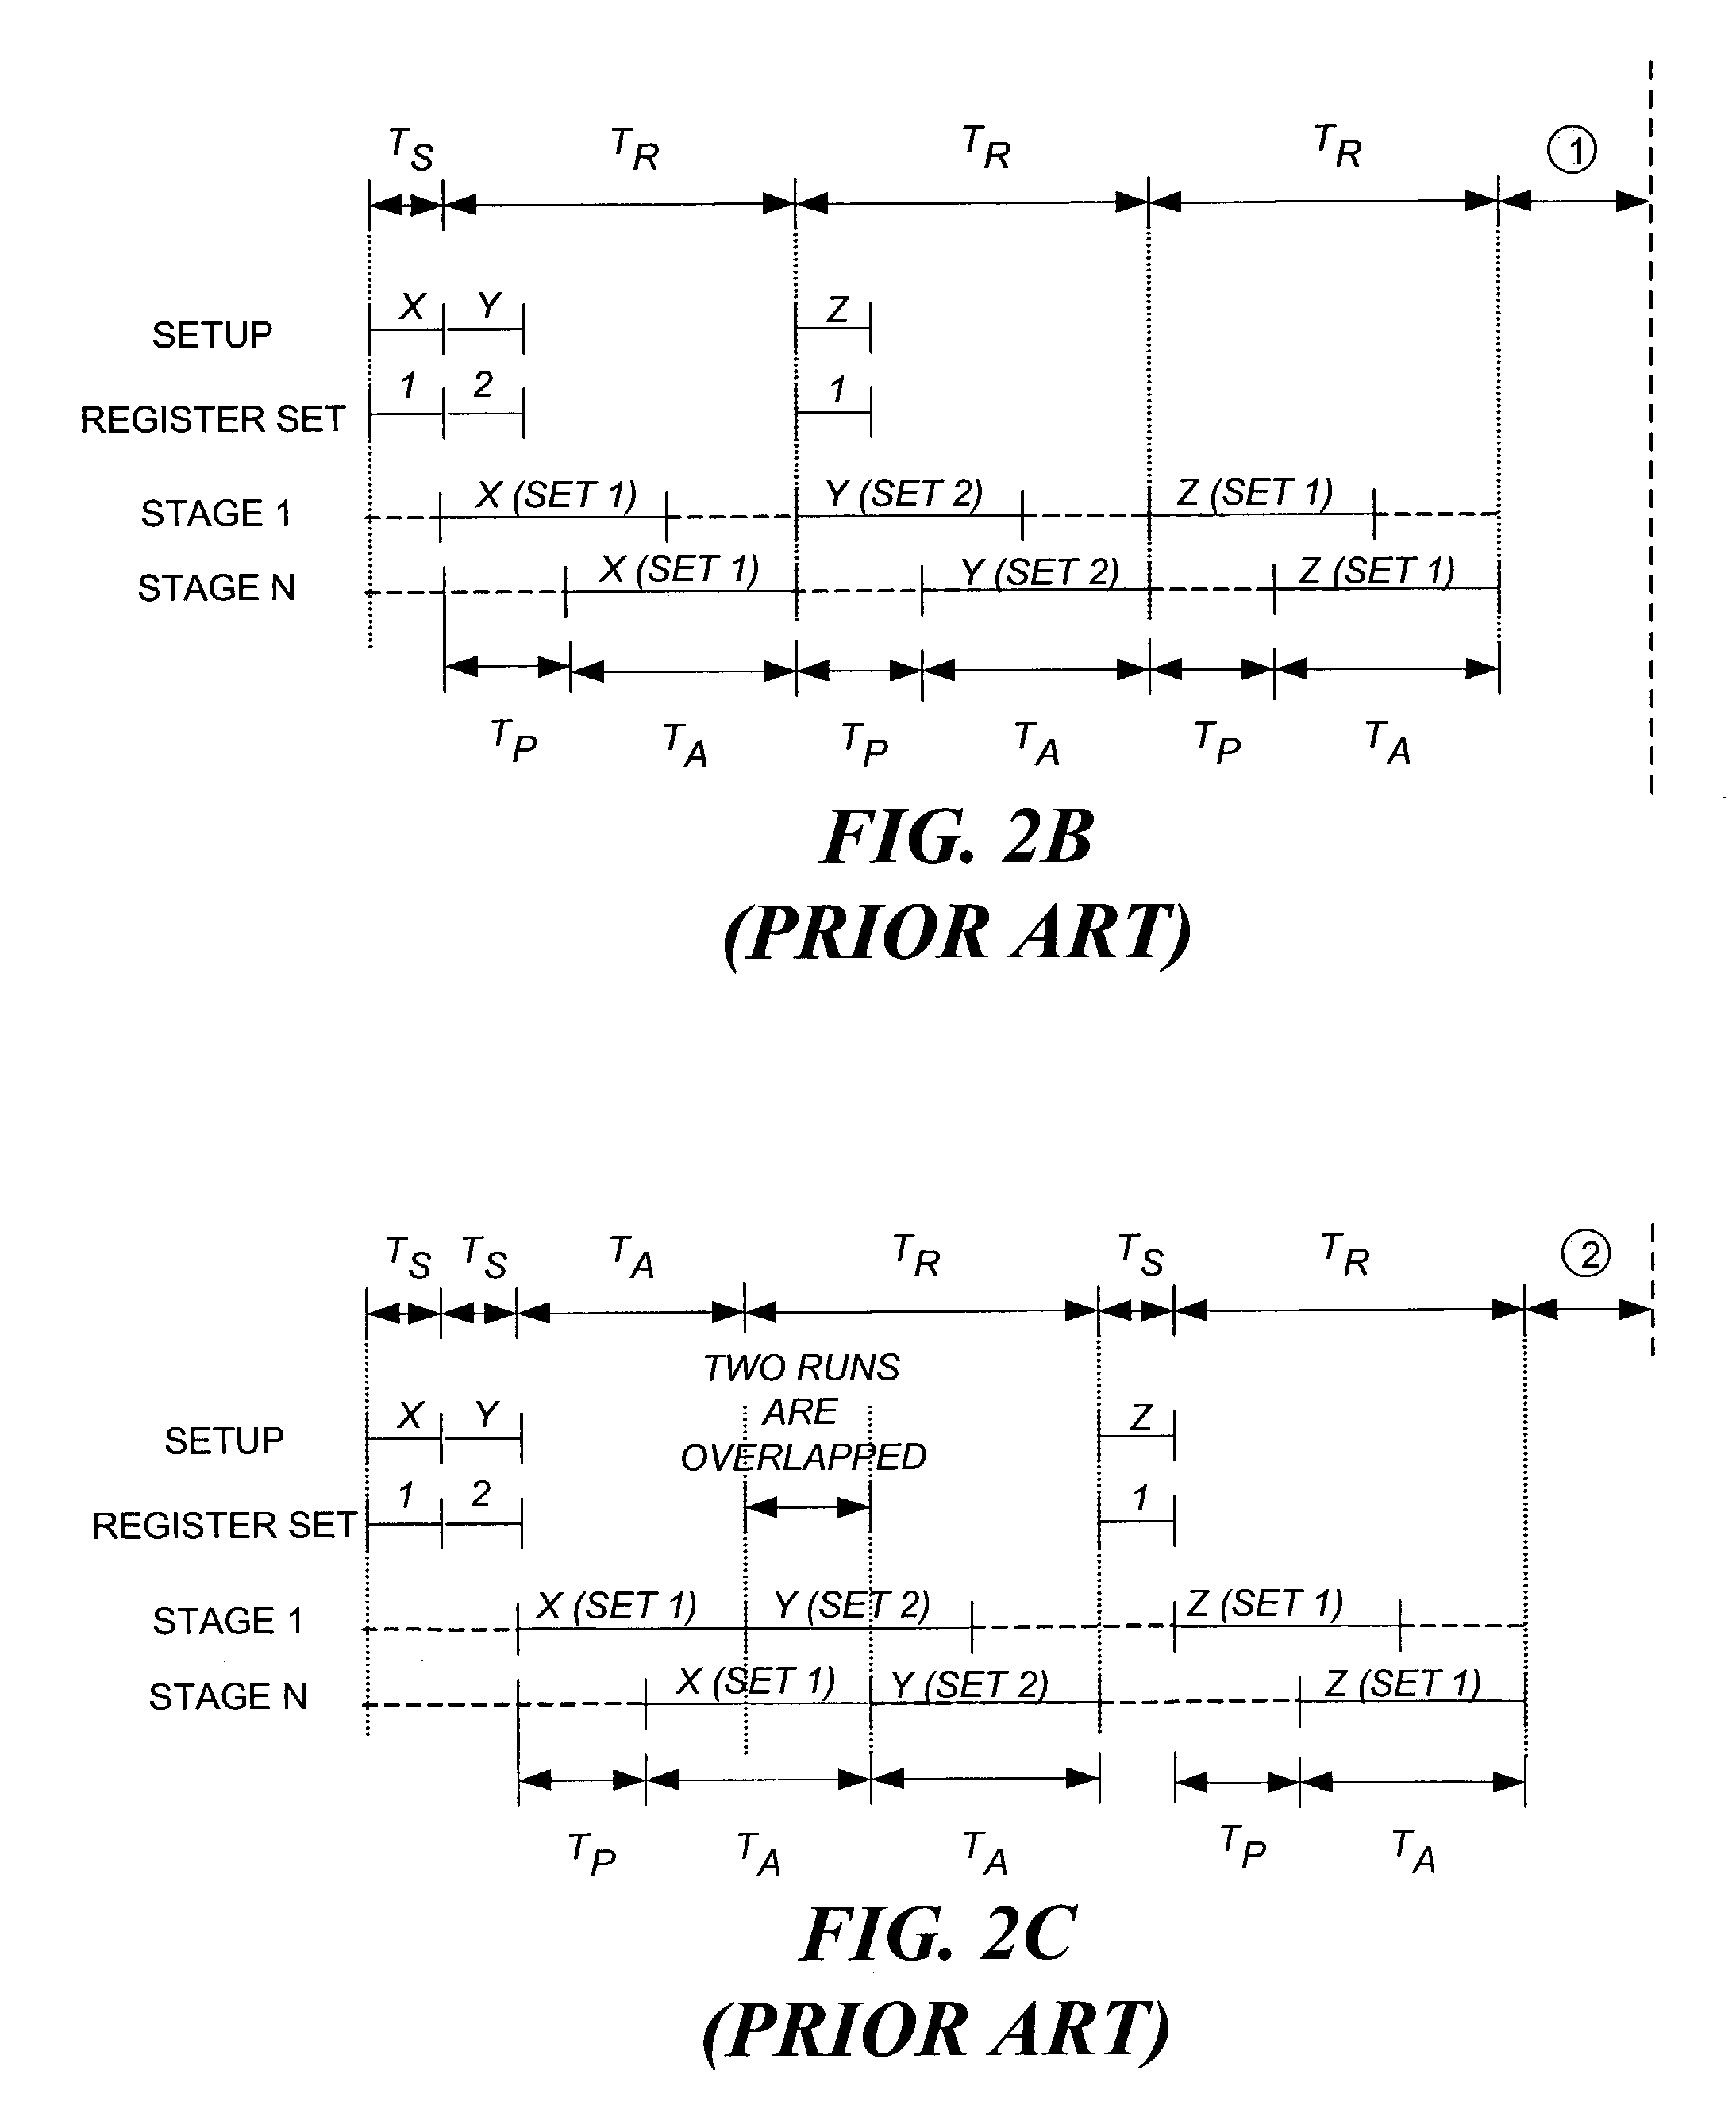 Processor employing loadable configuration parameters to reduce or eliminate setup and pipeline delays in a pipeline system